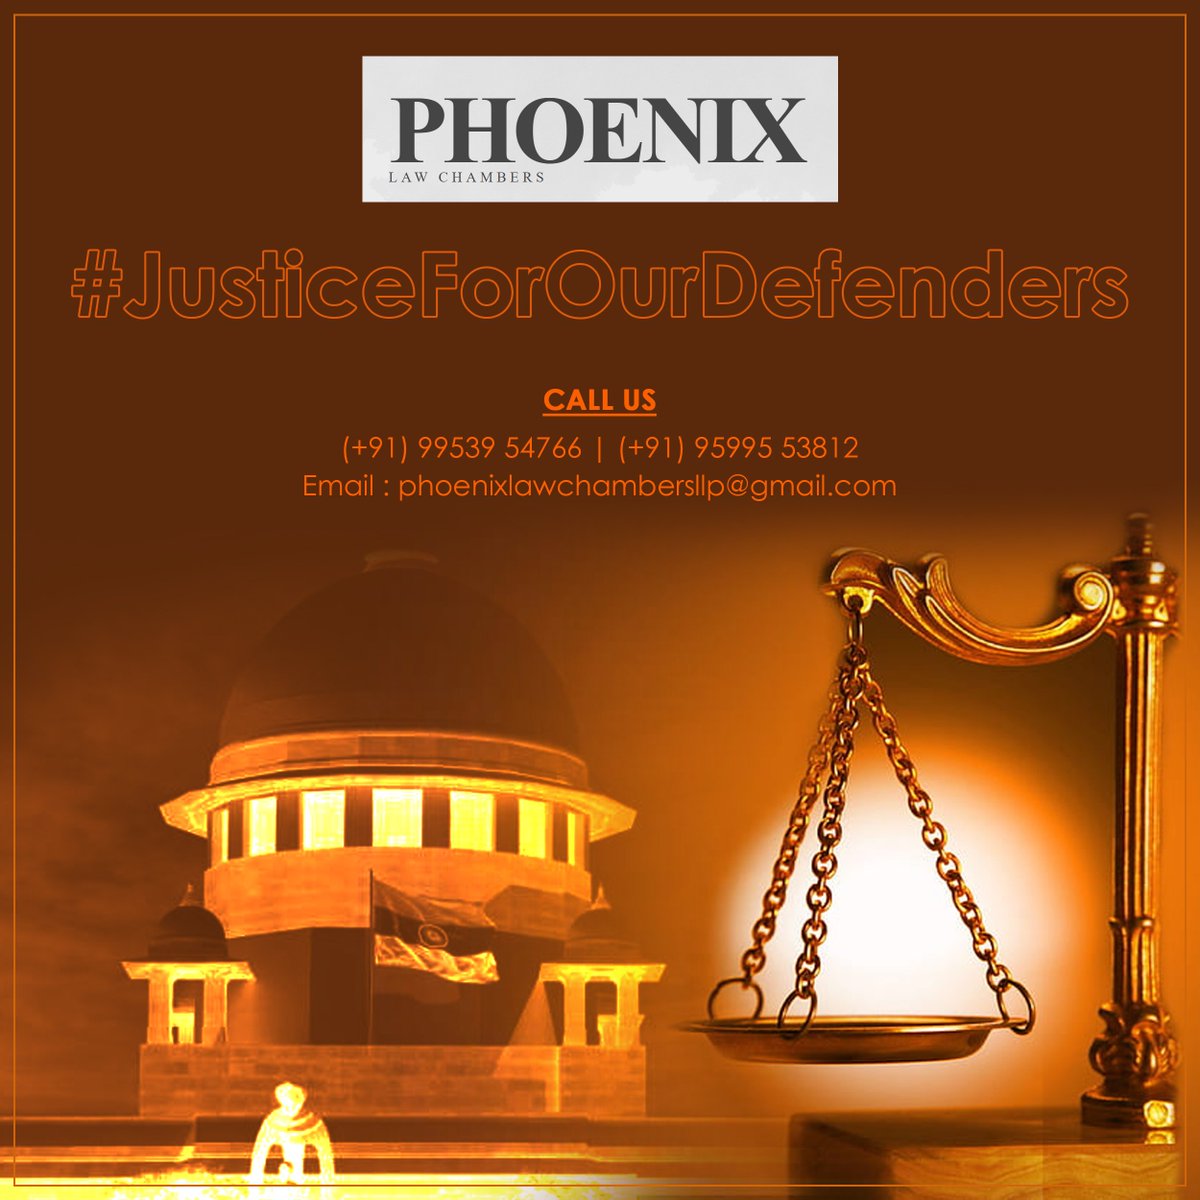 Our defenders deserve justice, and we are here to fight for them. At Phoenix Law Chambers, we have more than 10 years of experience advocating for those who risk their lives to protect us. 
 #JusticeForOurDefenders #PhoenixLawChambers #DelhiLawFirm #VoiceOfJustice